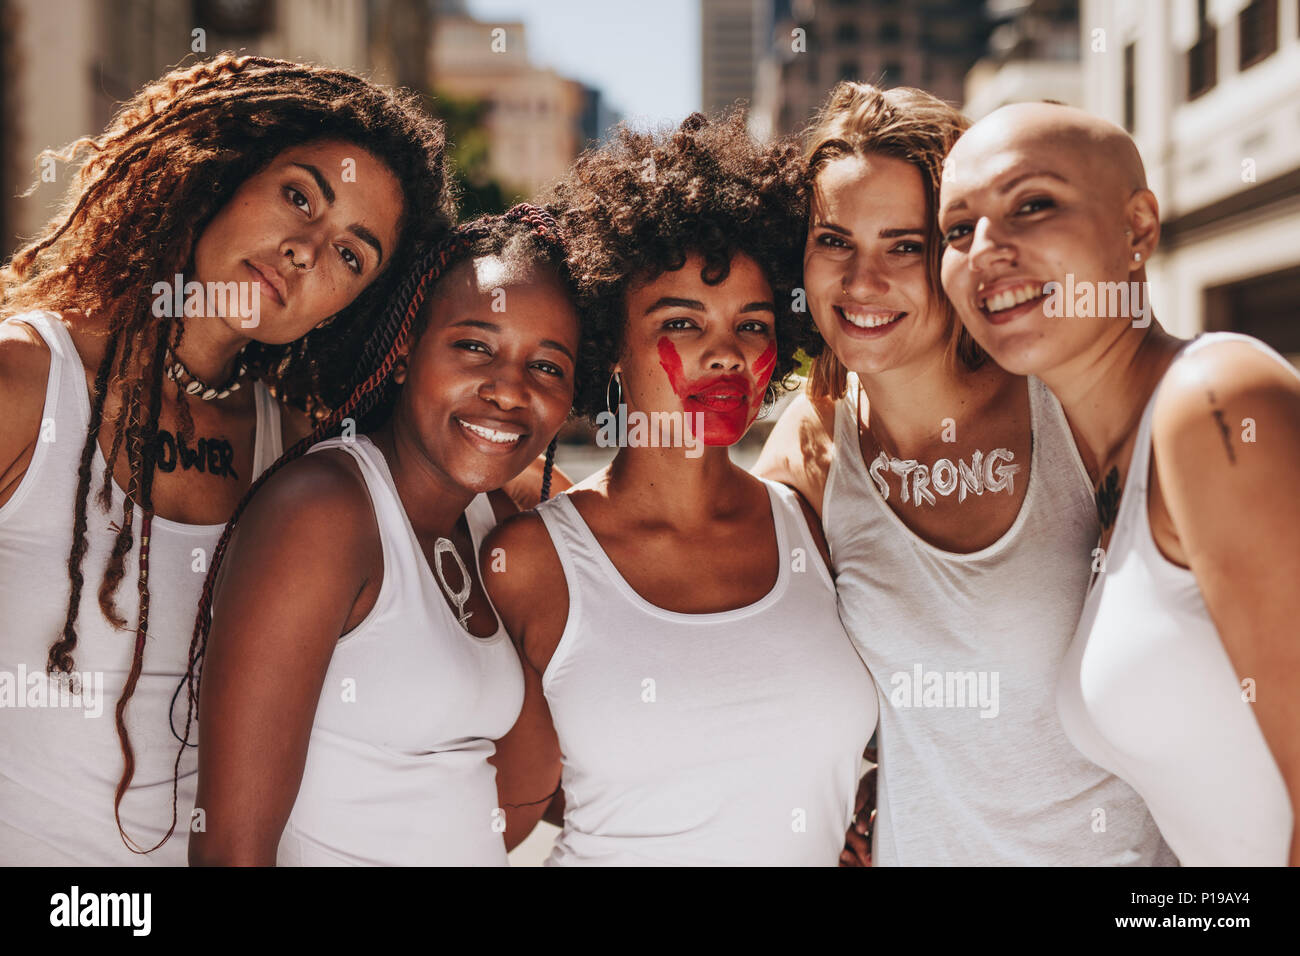 Group of women in dress code protesting outdoors. Smiling females protesting for women rights. Stock Photo